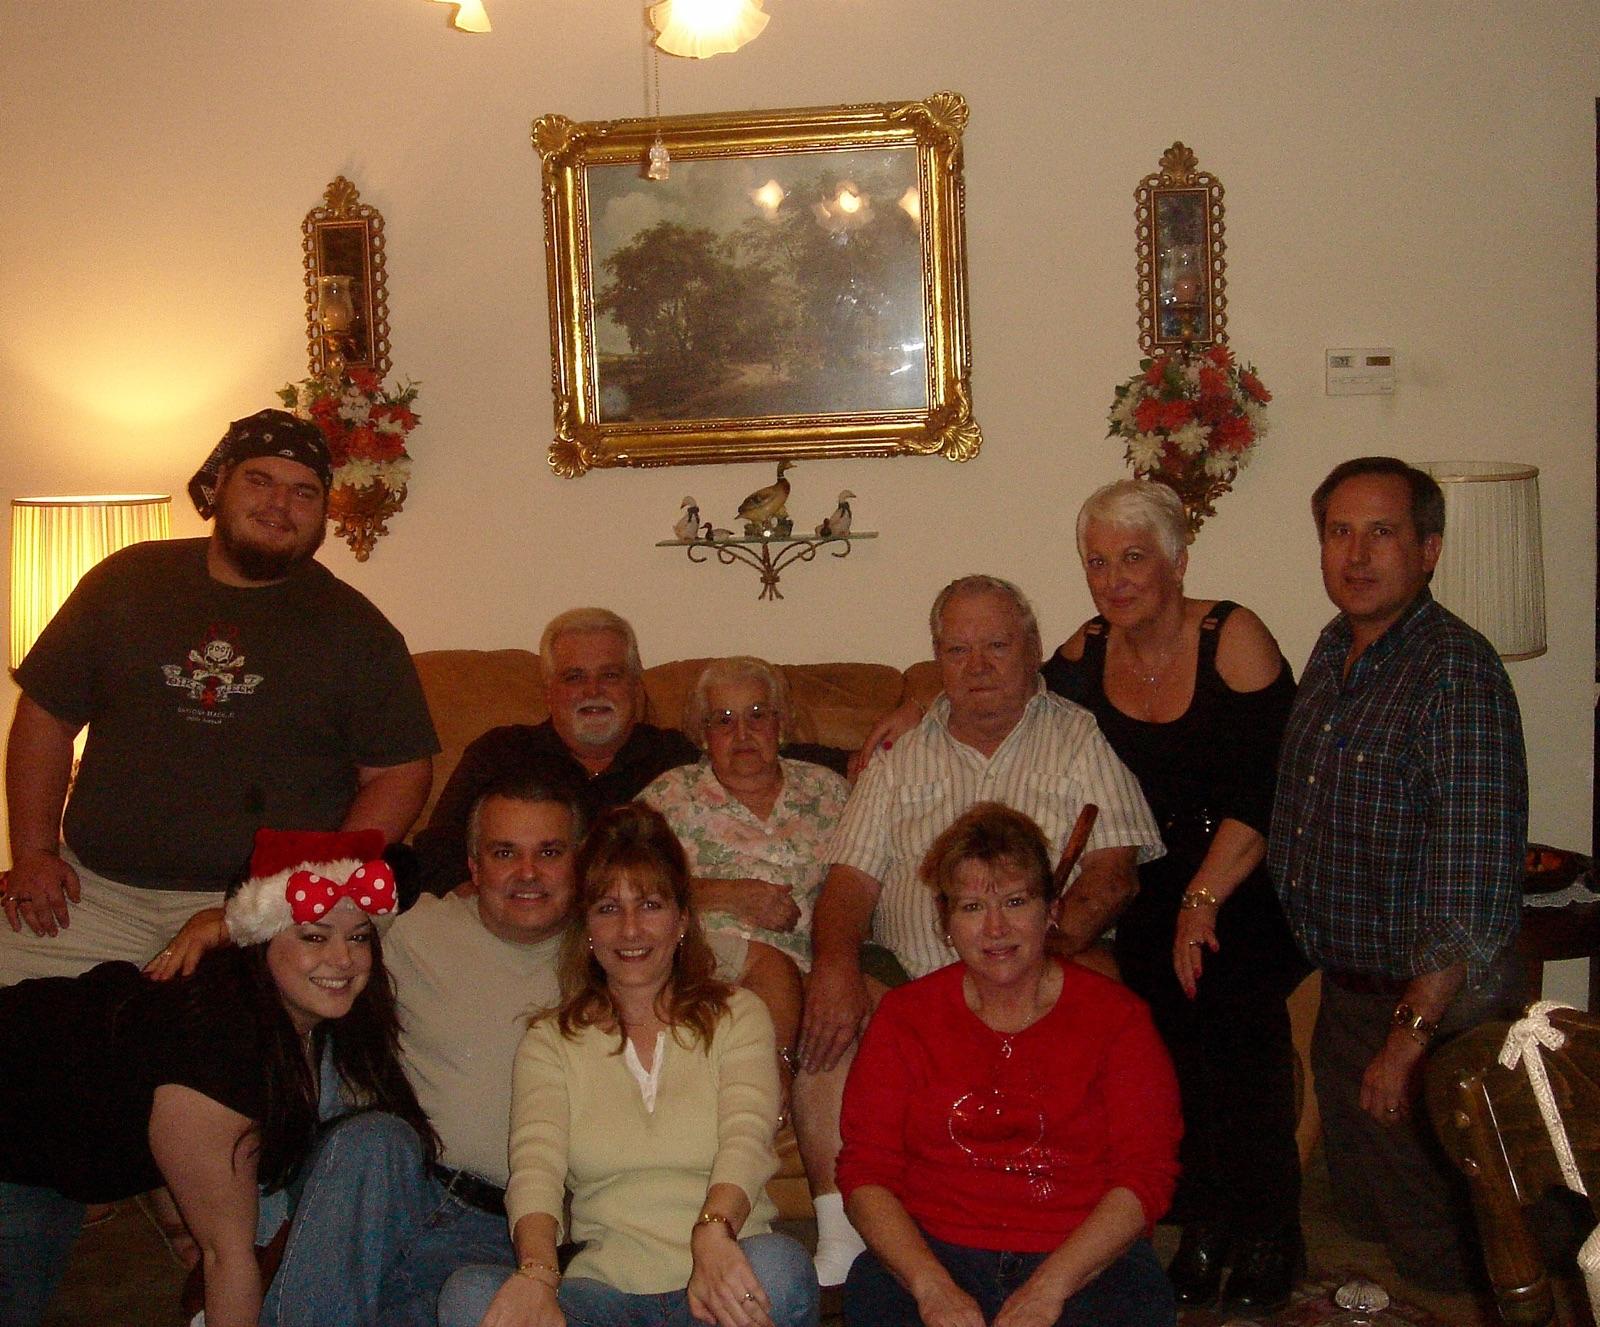 One of the only full family pics I have. Grandma will be missed forever. We will always remember her love and kindness.